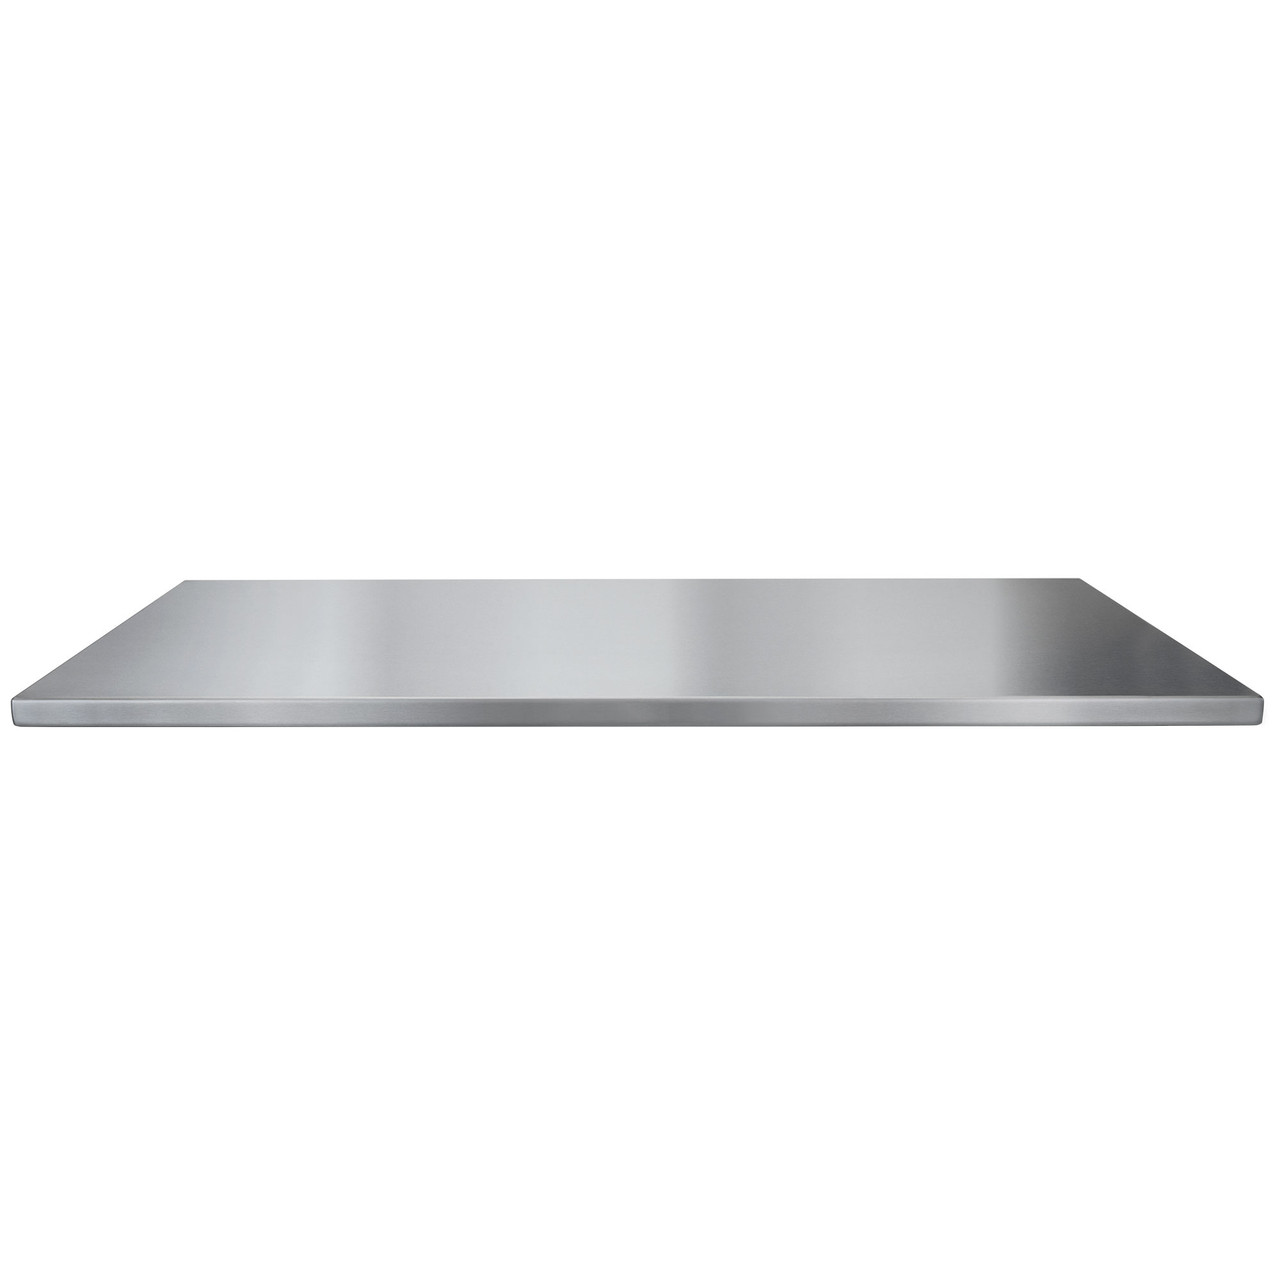 Stainless Steel Countertop Custom Sizes Made To Order